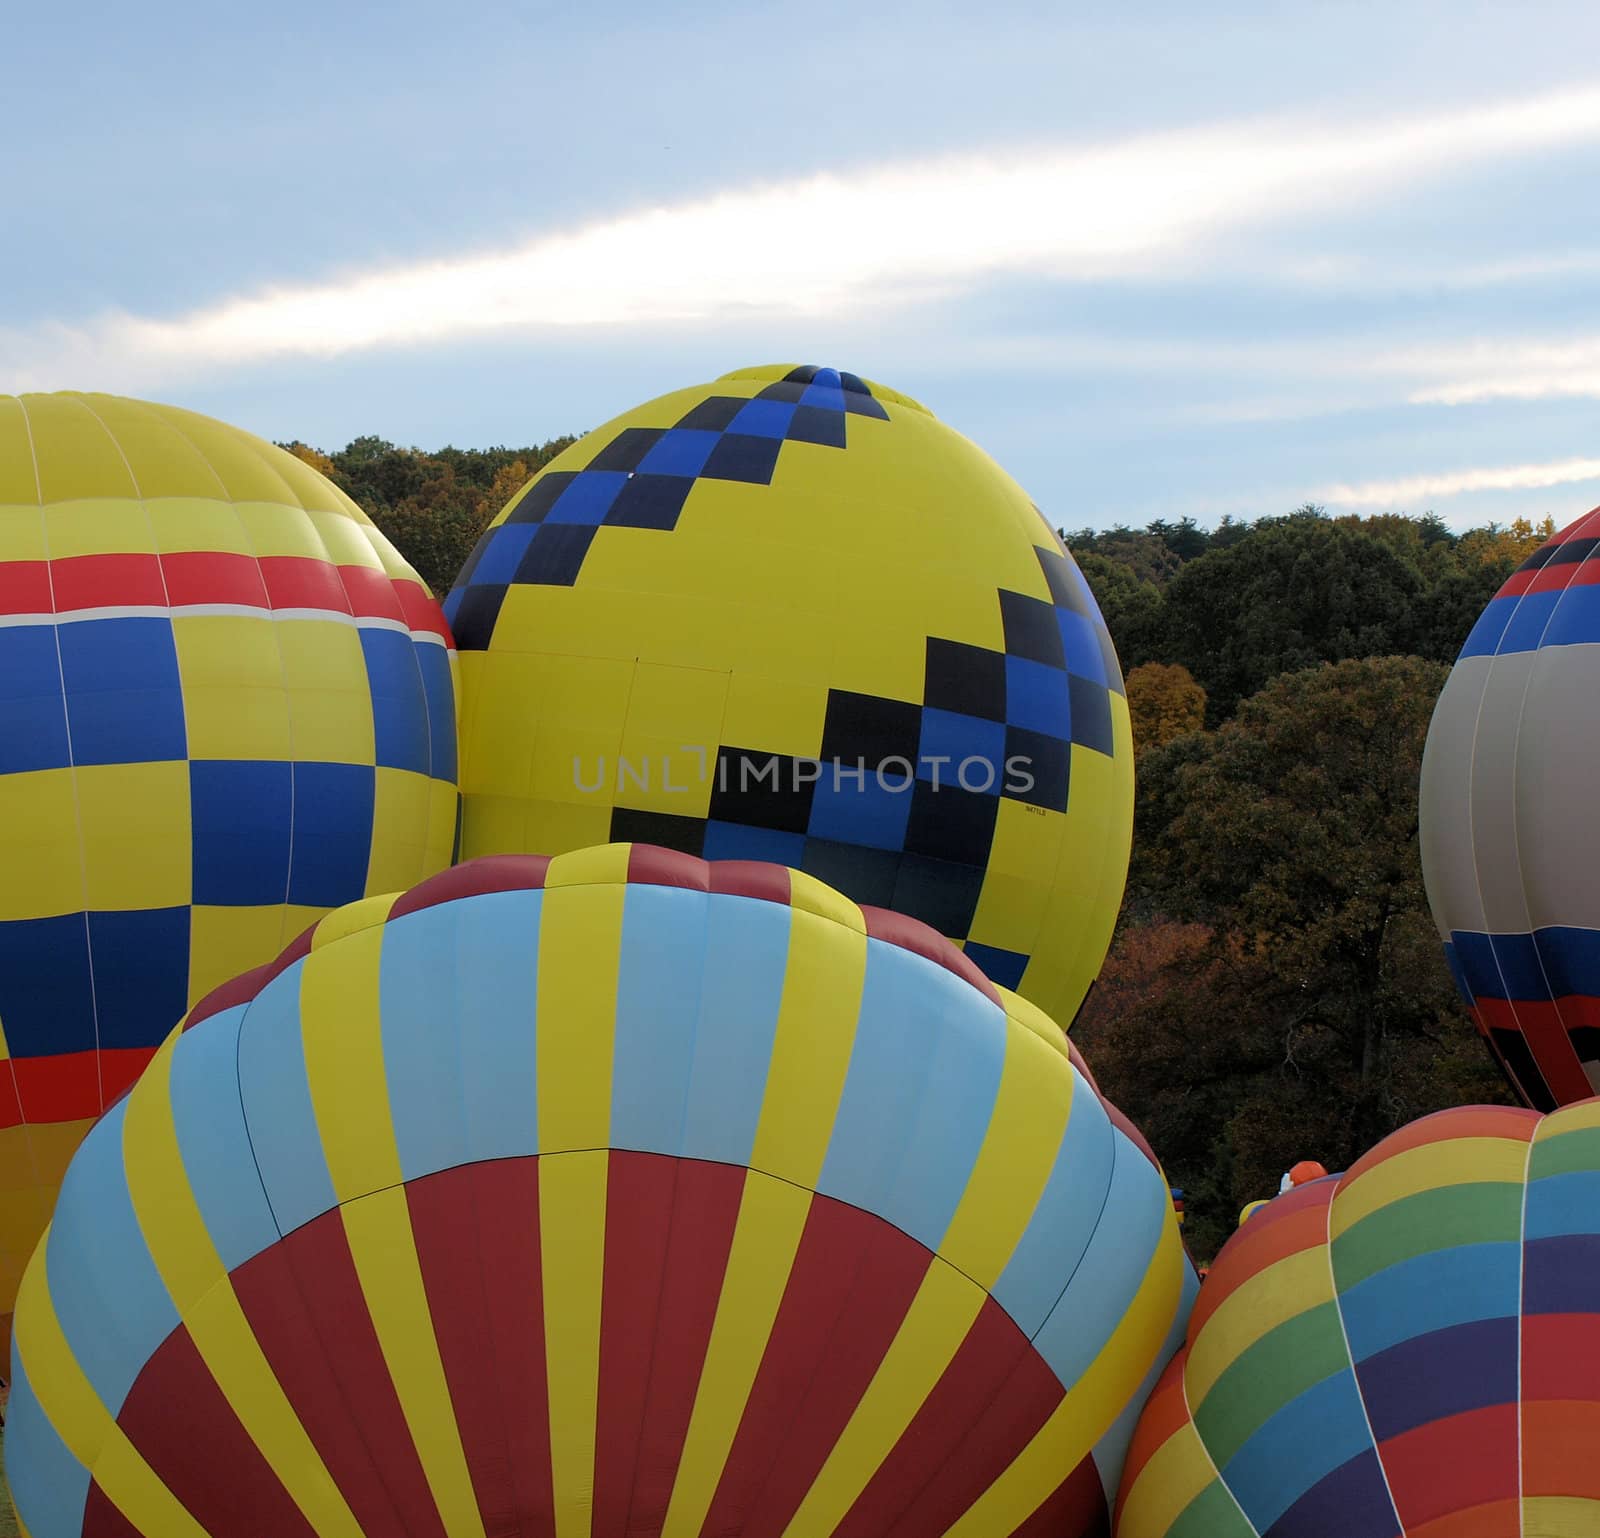 Hot air balloons filling up before their take-off flight